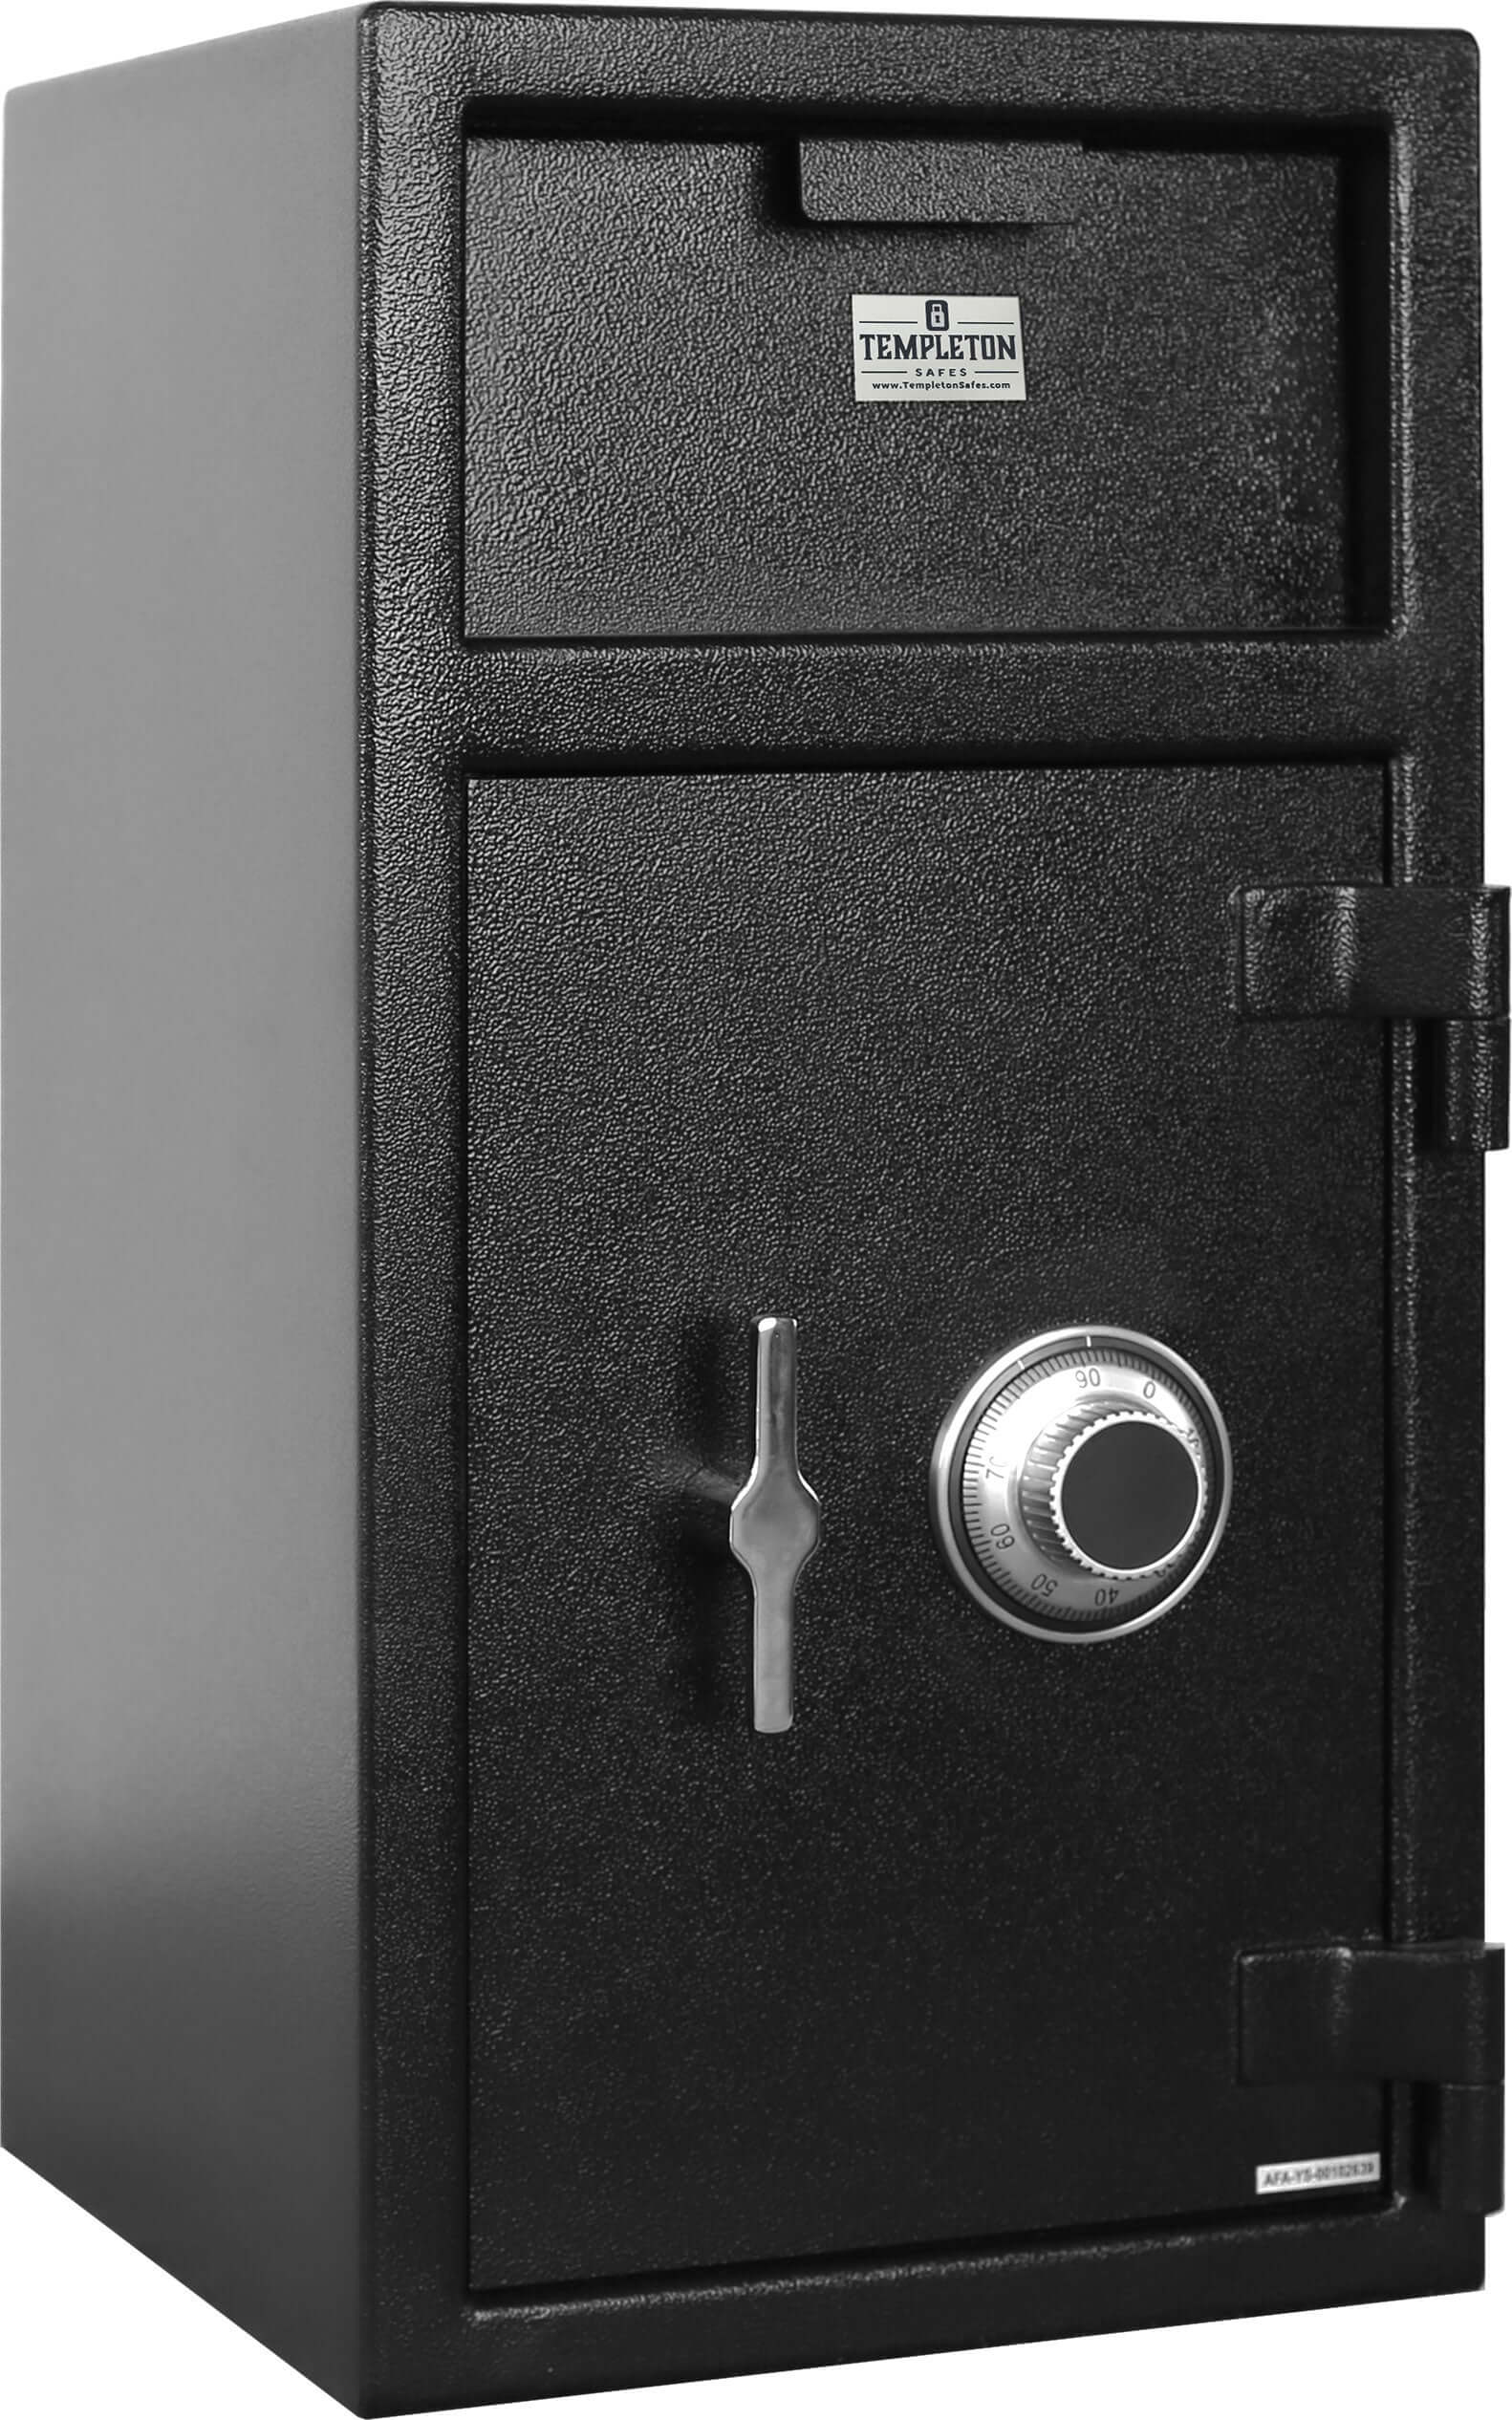 T866 Depository Drop Safe with U.L. Listed LG1777 Combination Lock